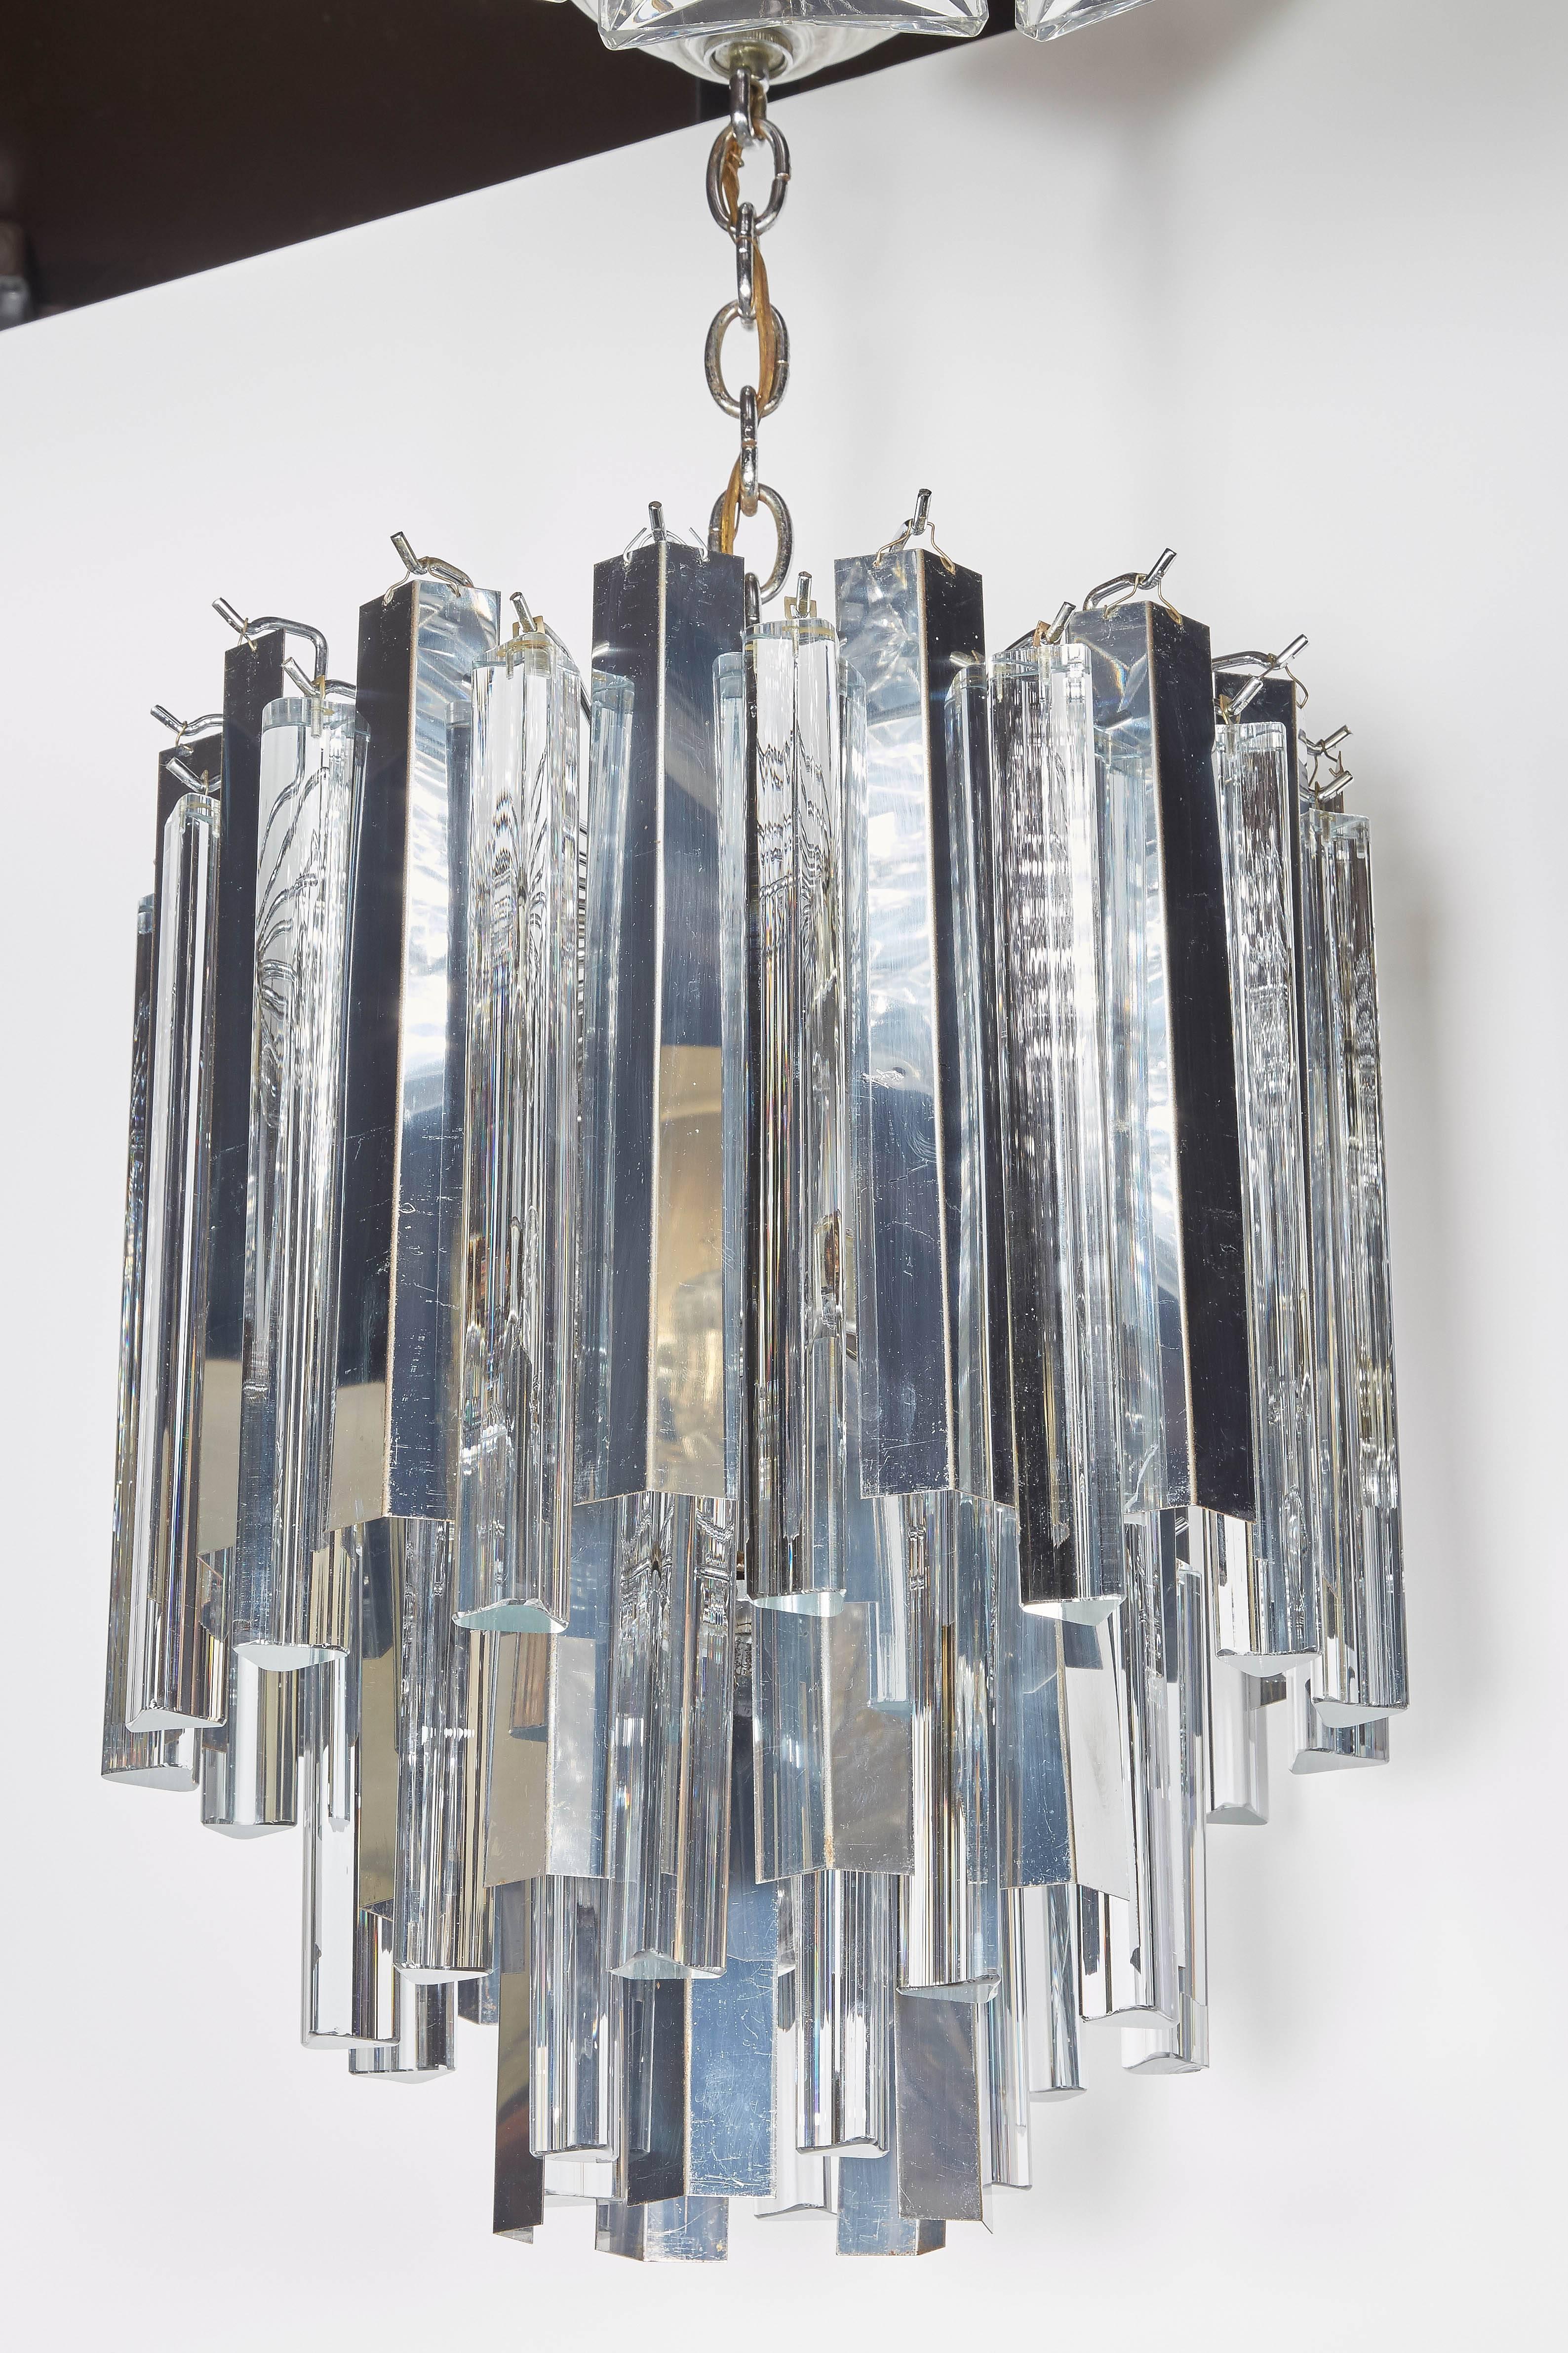 Rare modernist chandelier with multi-tier design, comprised of Murano glass prisms with triedre (three-sided) design and alternating polished chrome pendants. Fitted with 11 lights, (10 interior lights and 1 down light). The chandelier has steel